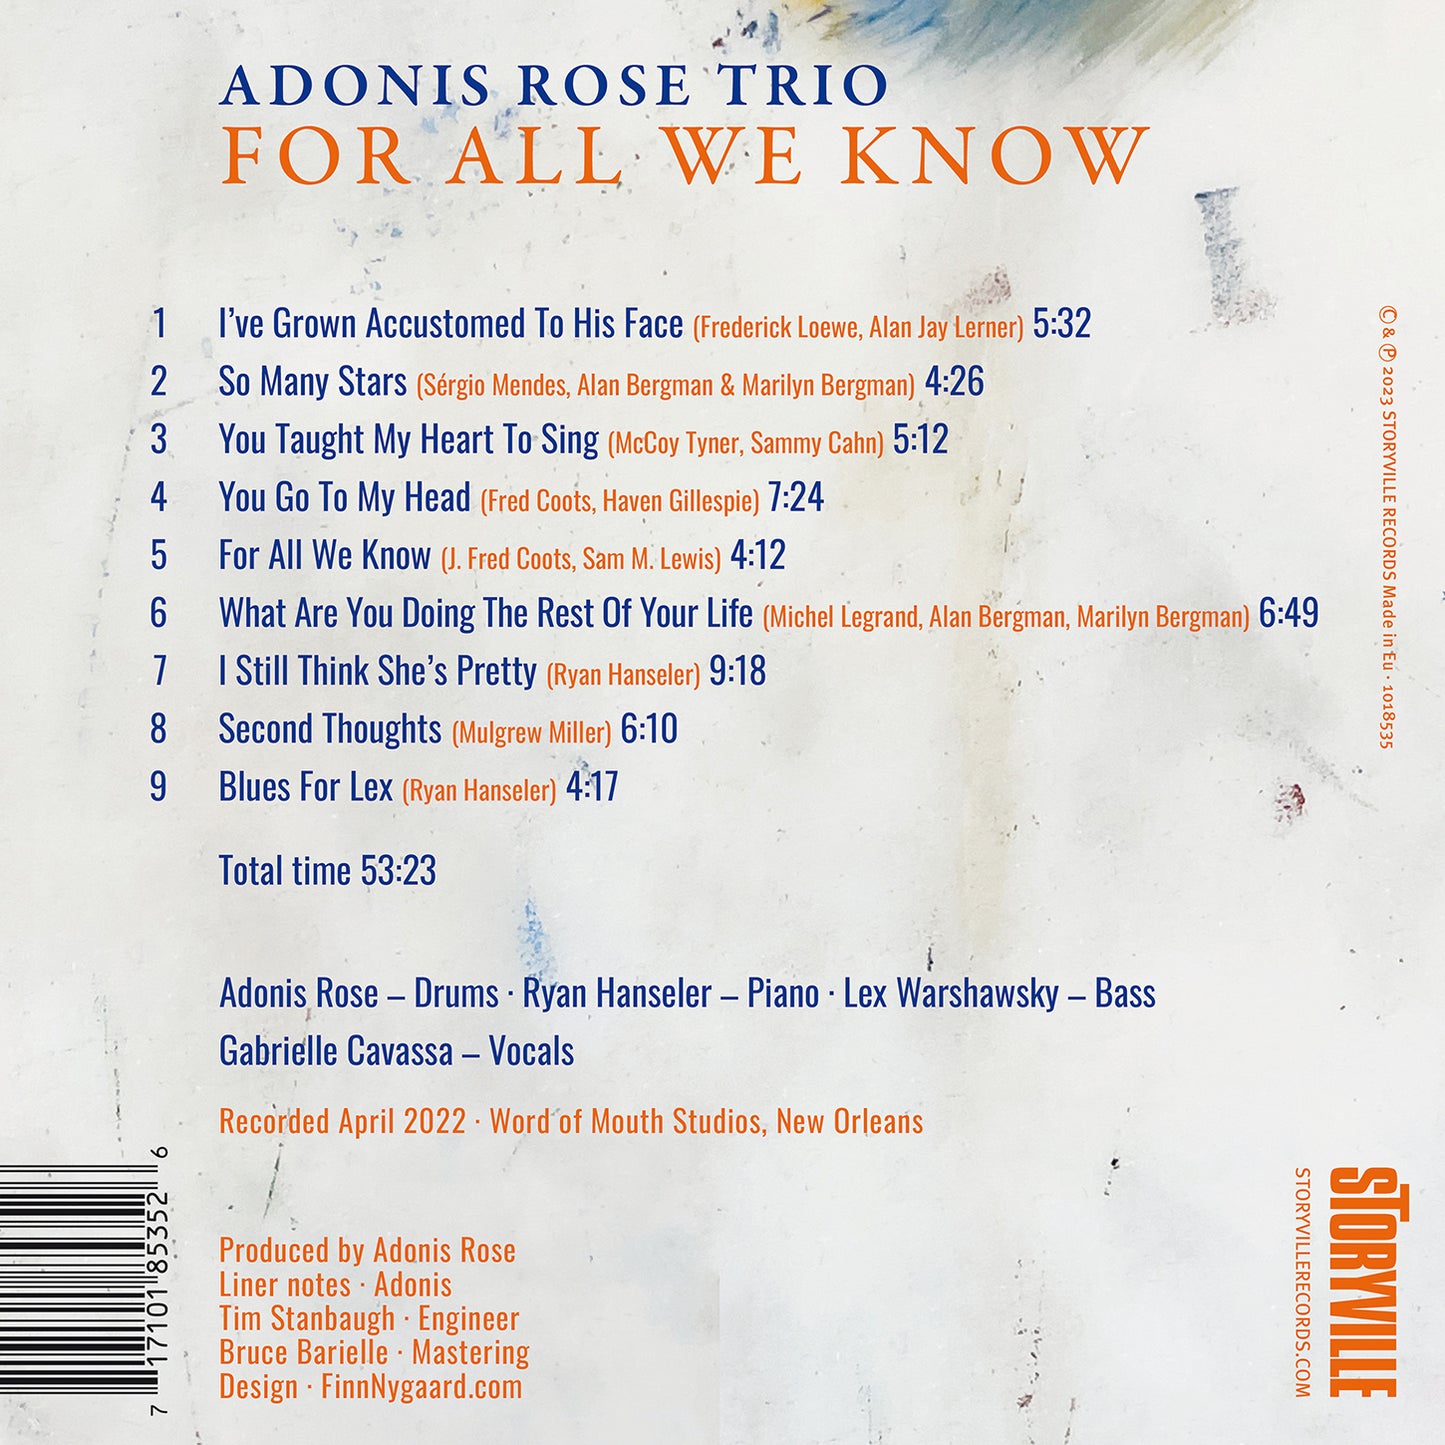 For All We Know / Adonis Rose Trio